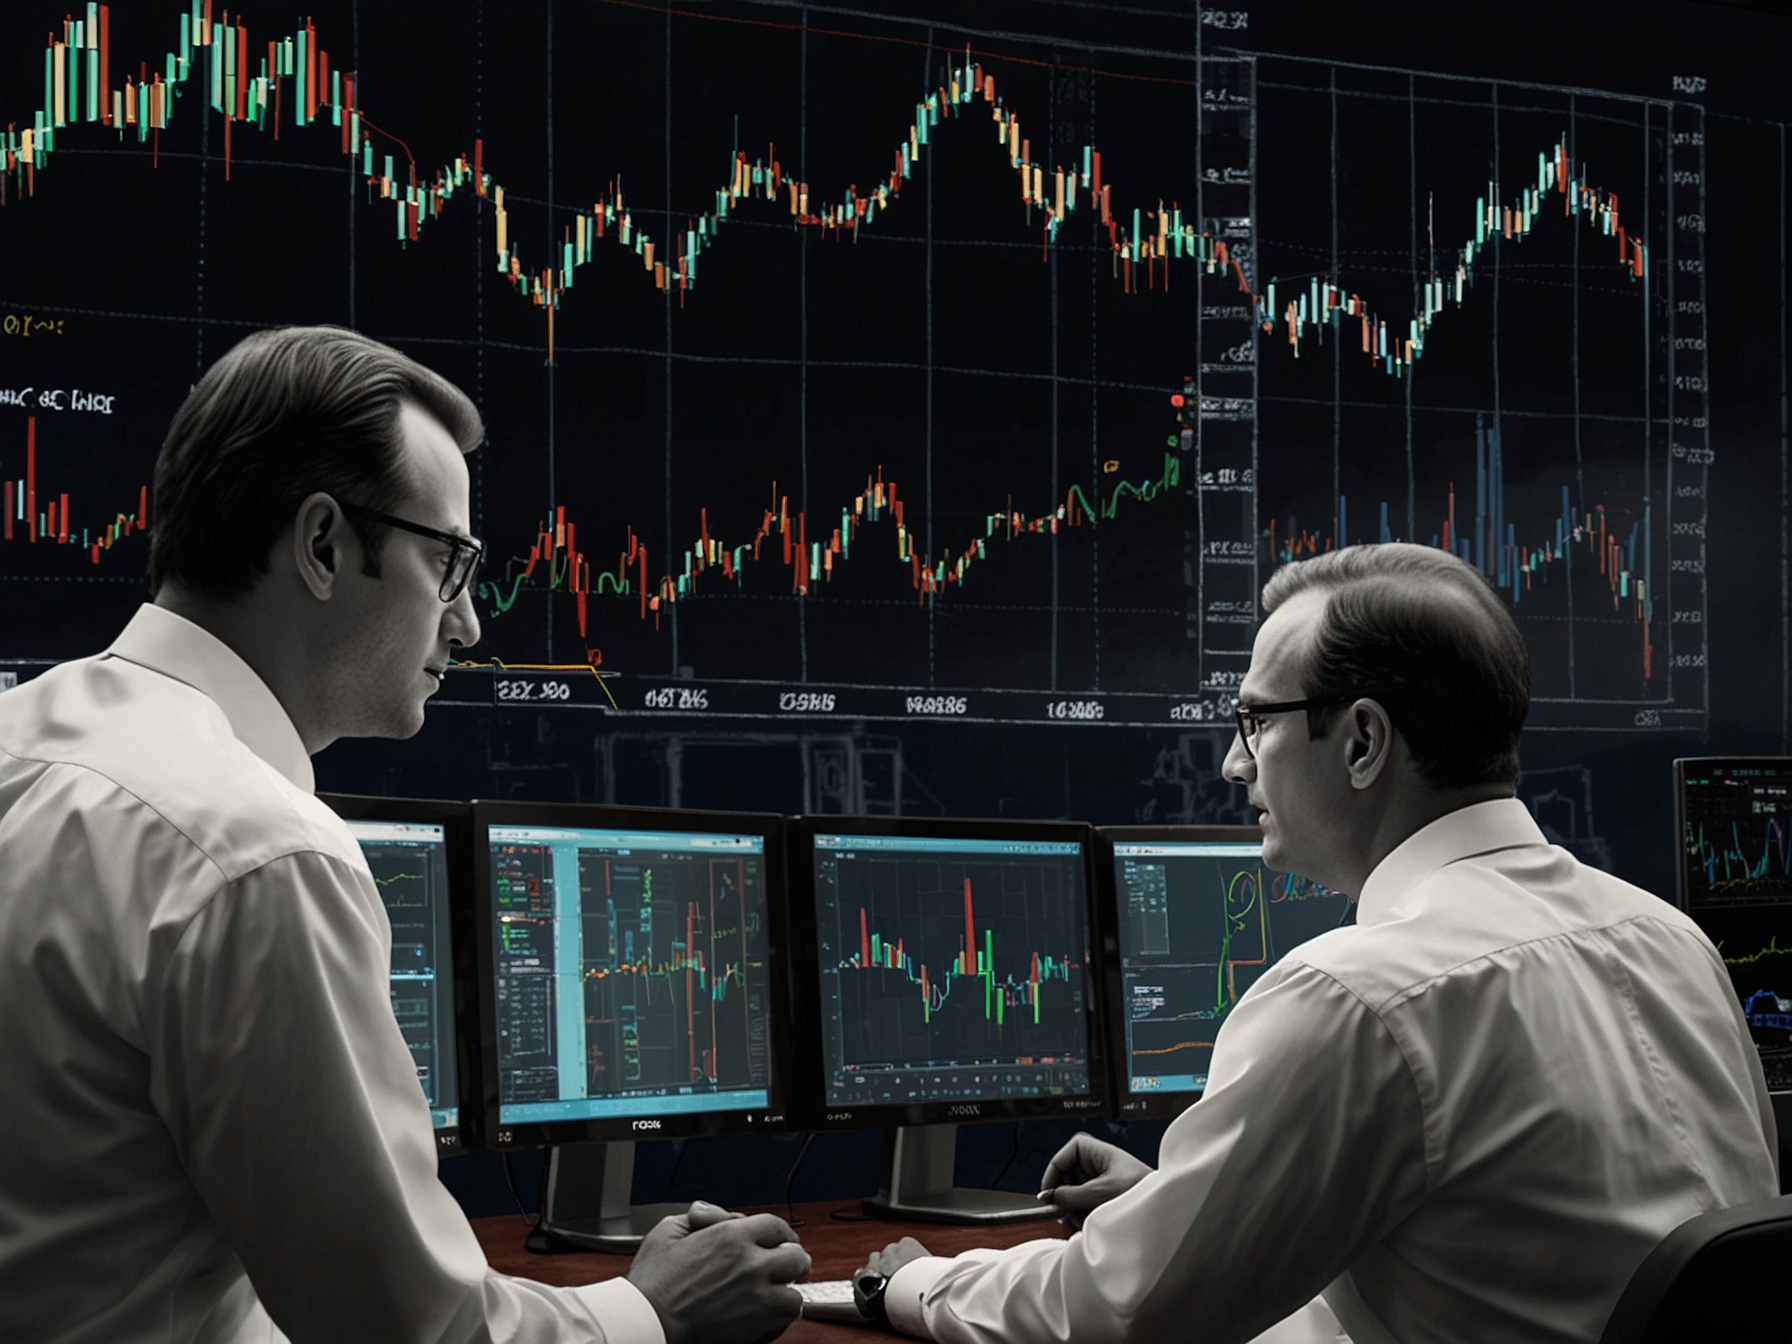 Investors monitoring stock performance on multiple screens, depicting their active engagement and analysis of Reliance Power's share price movements and market trends.